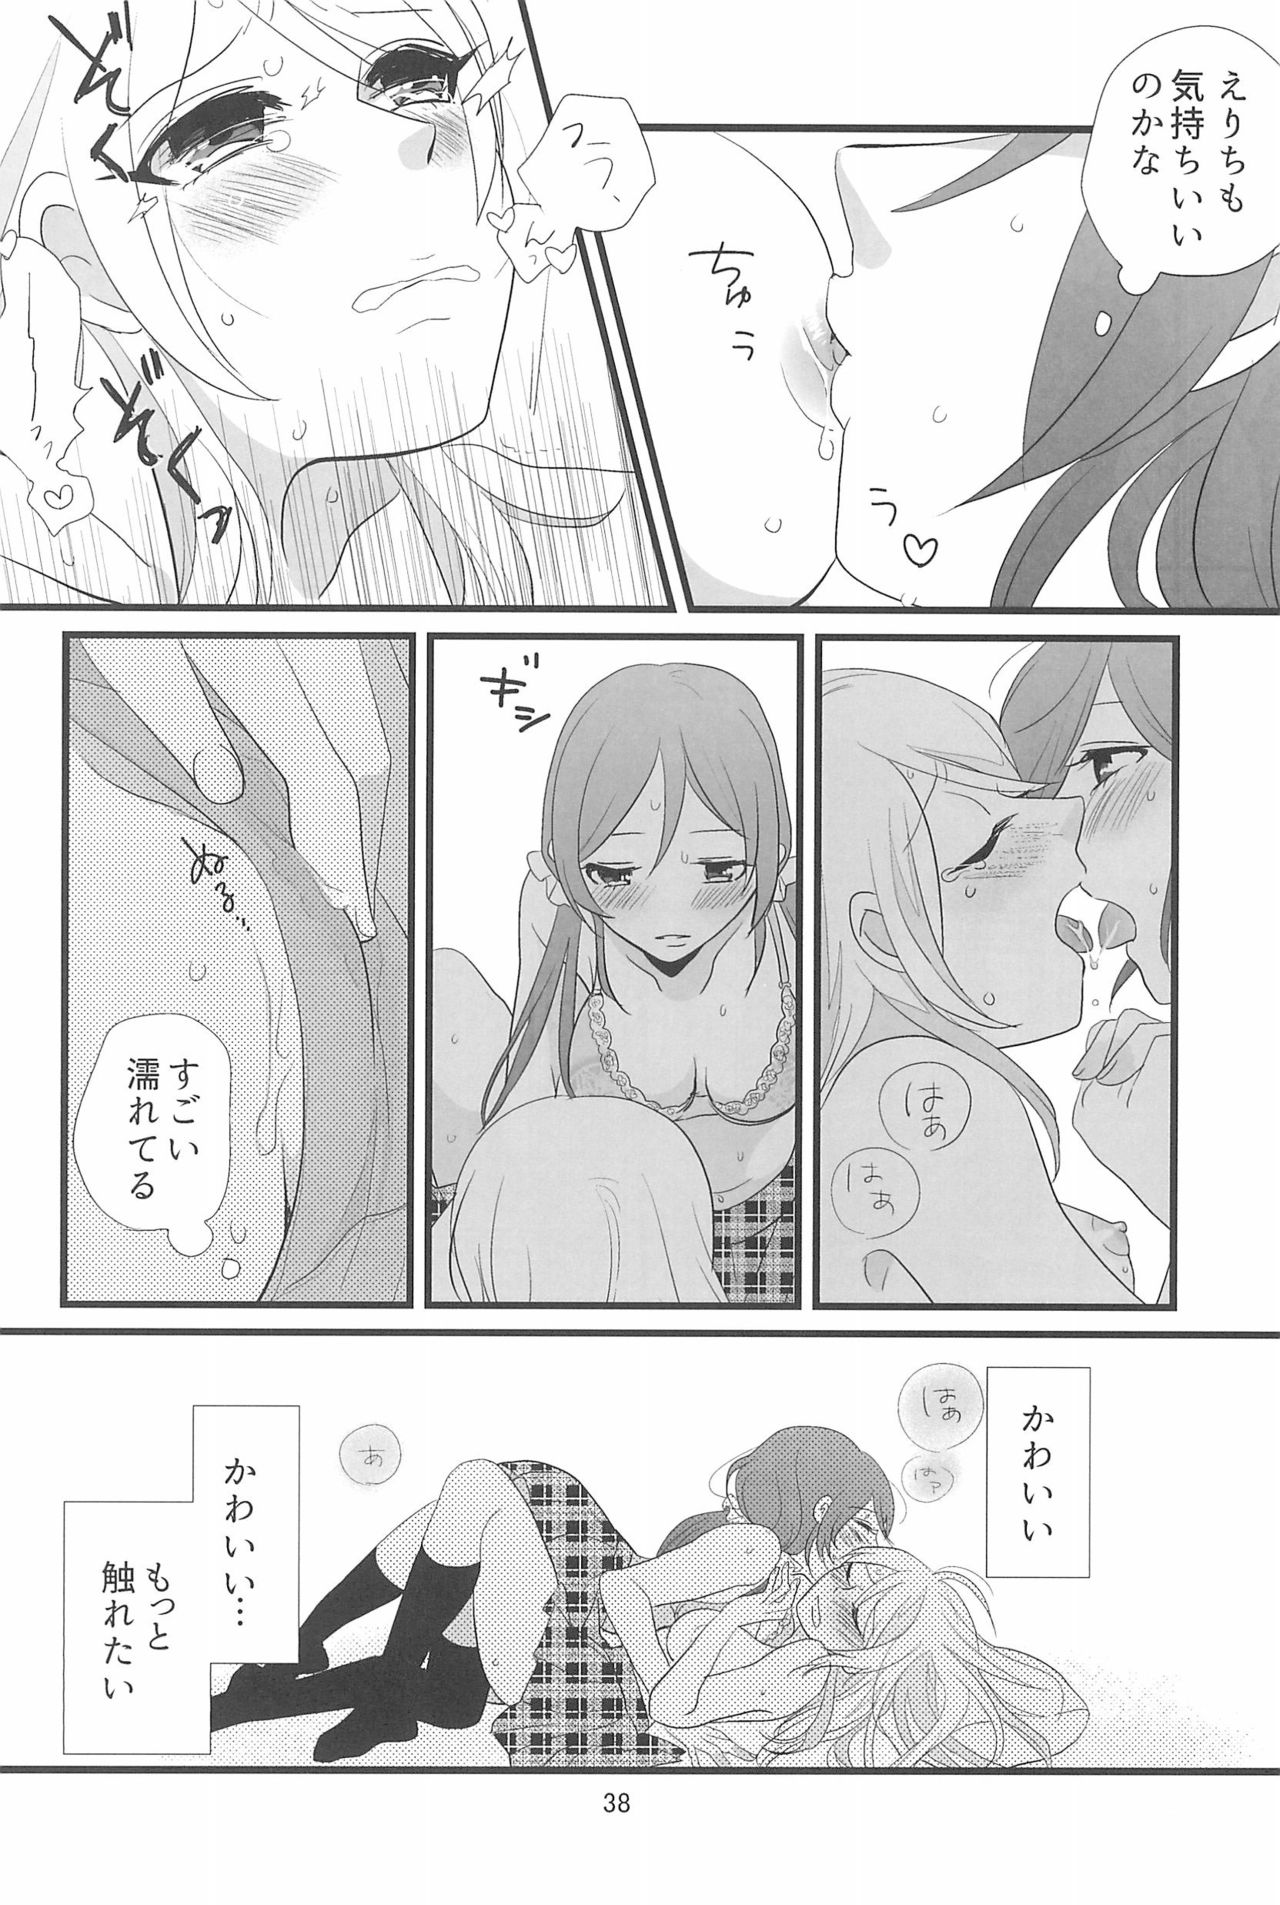 (C90) [BK*N2 (Mikawa Miso)] HAPPY GO LUCKY DAYS (Love Live!) page 42 full